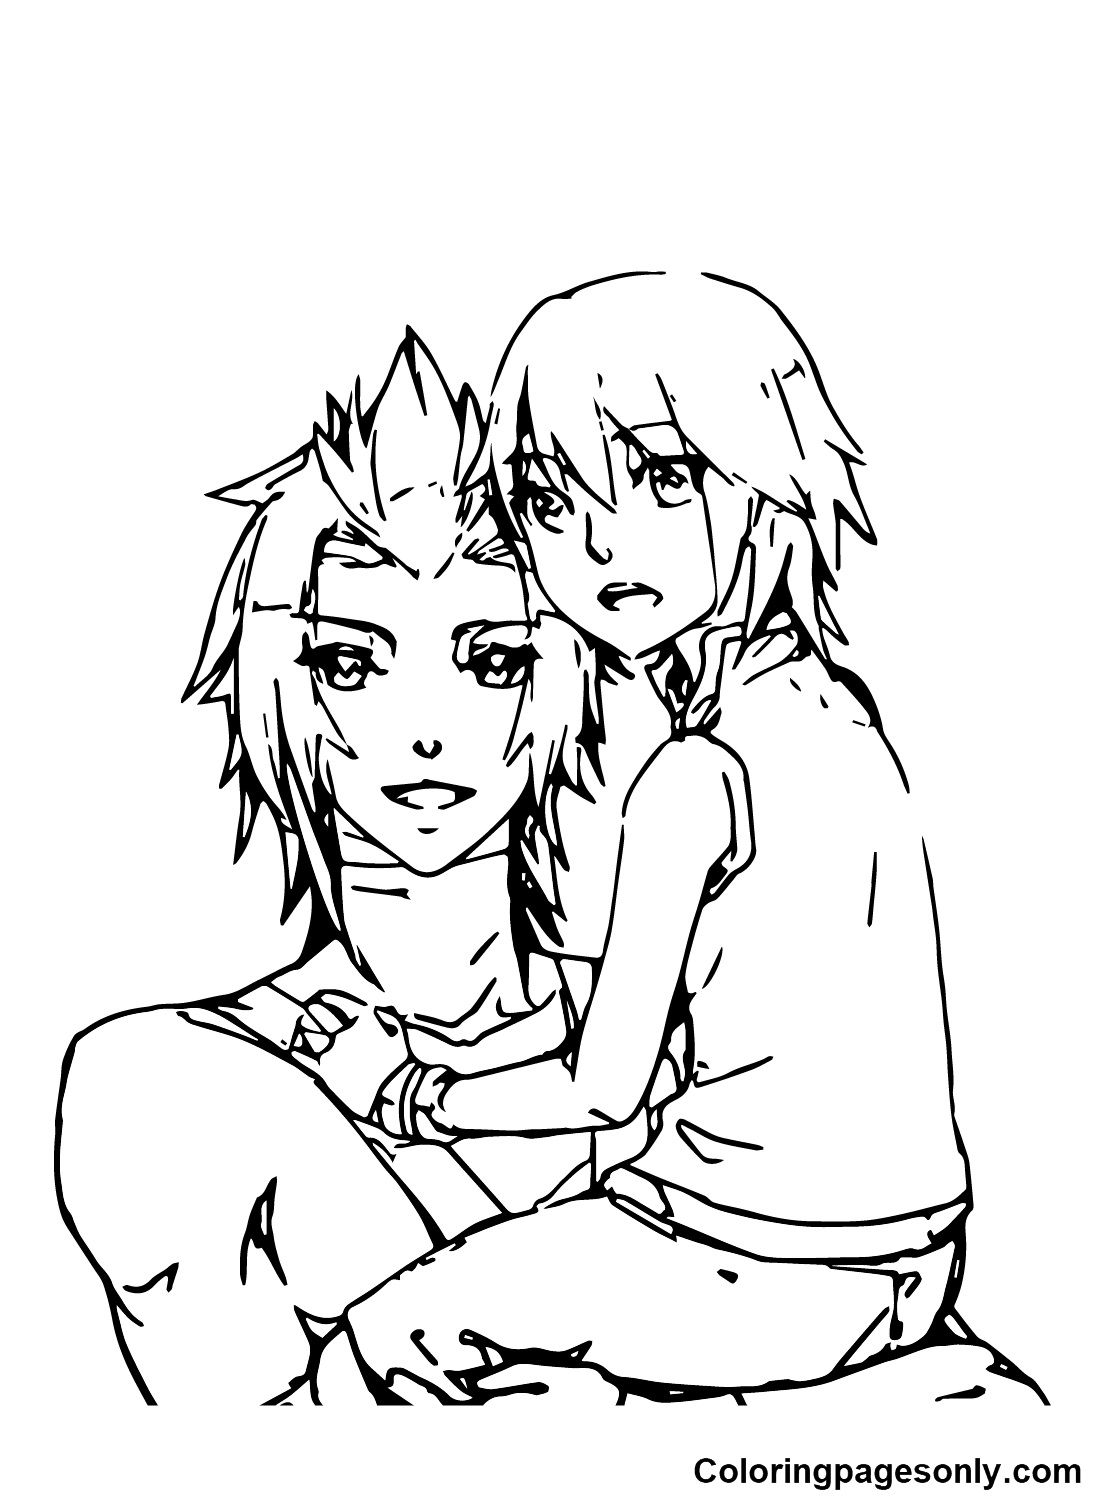 Kingdom Hearts Free Coloring Pages